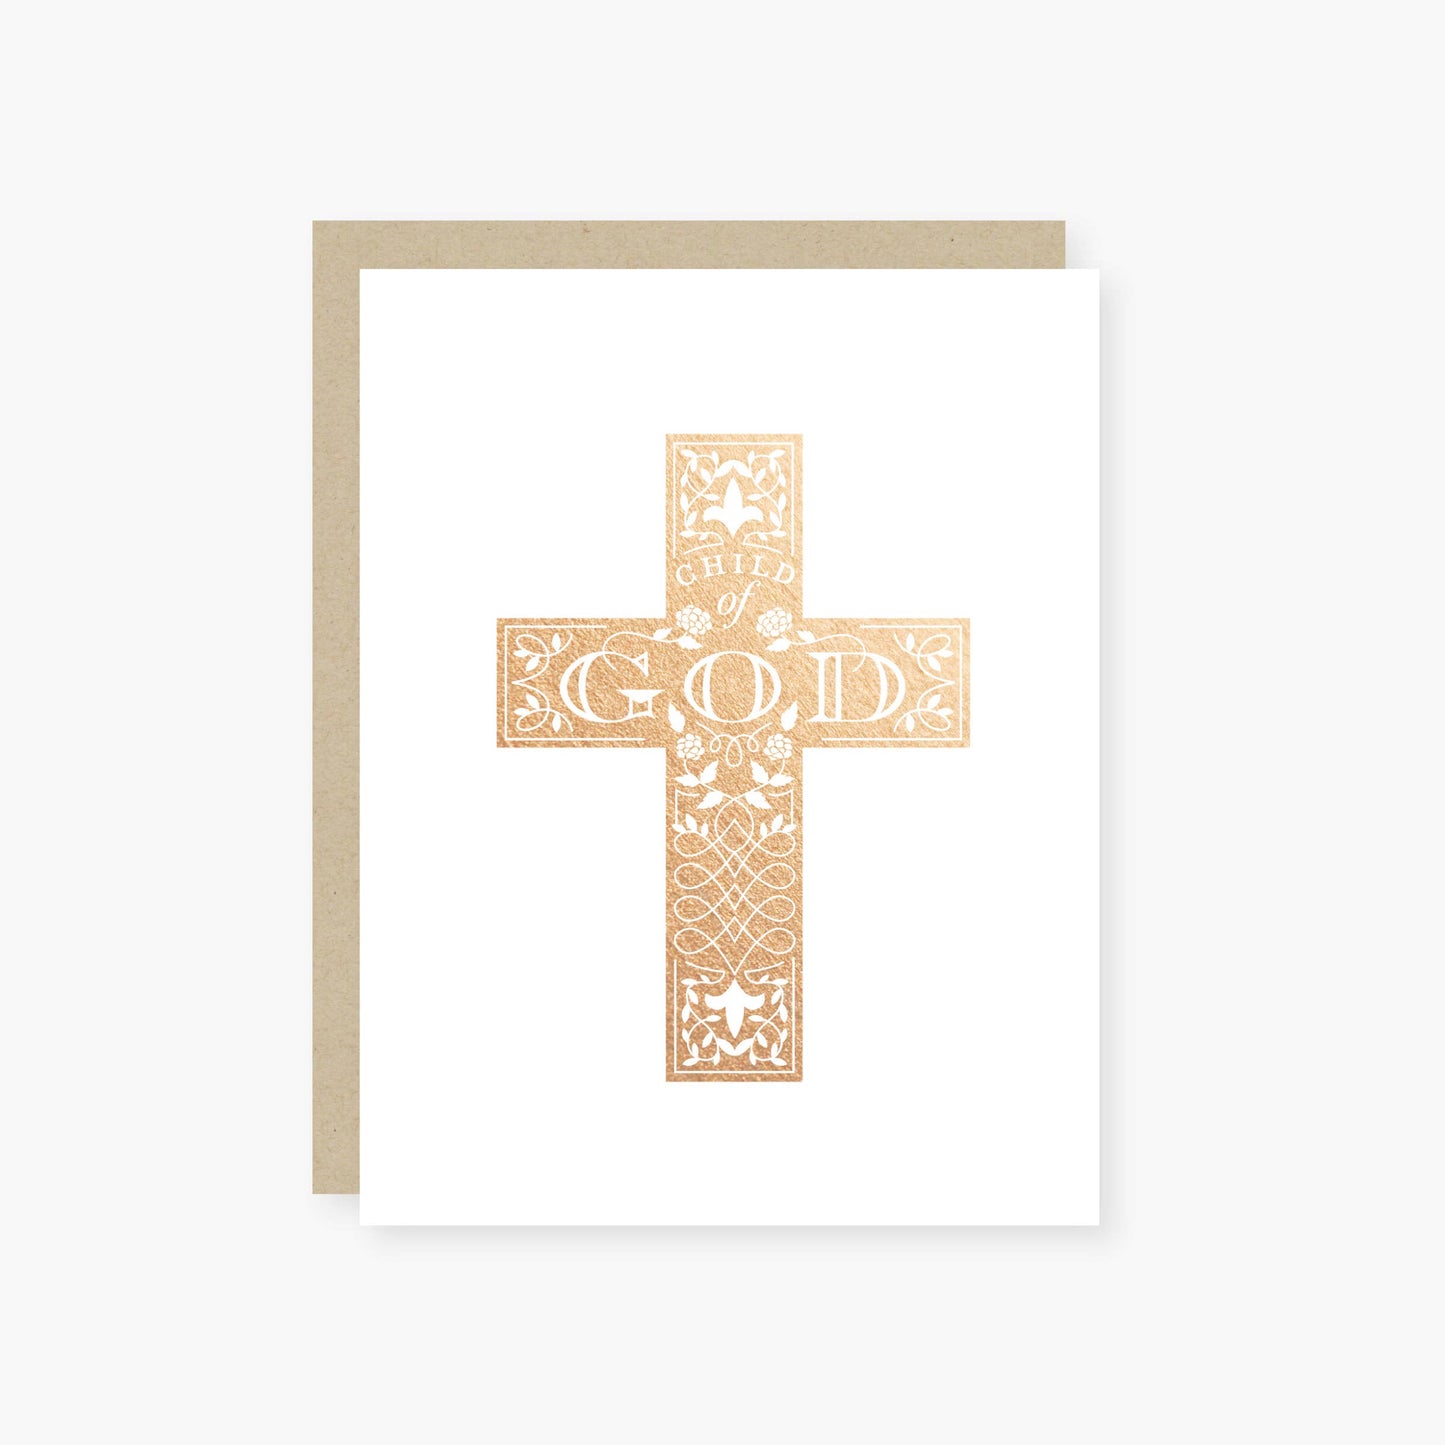 Child of God/Communion Card (Gold Foil) By 2021 Co.